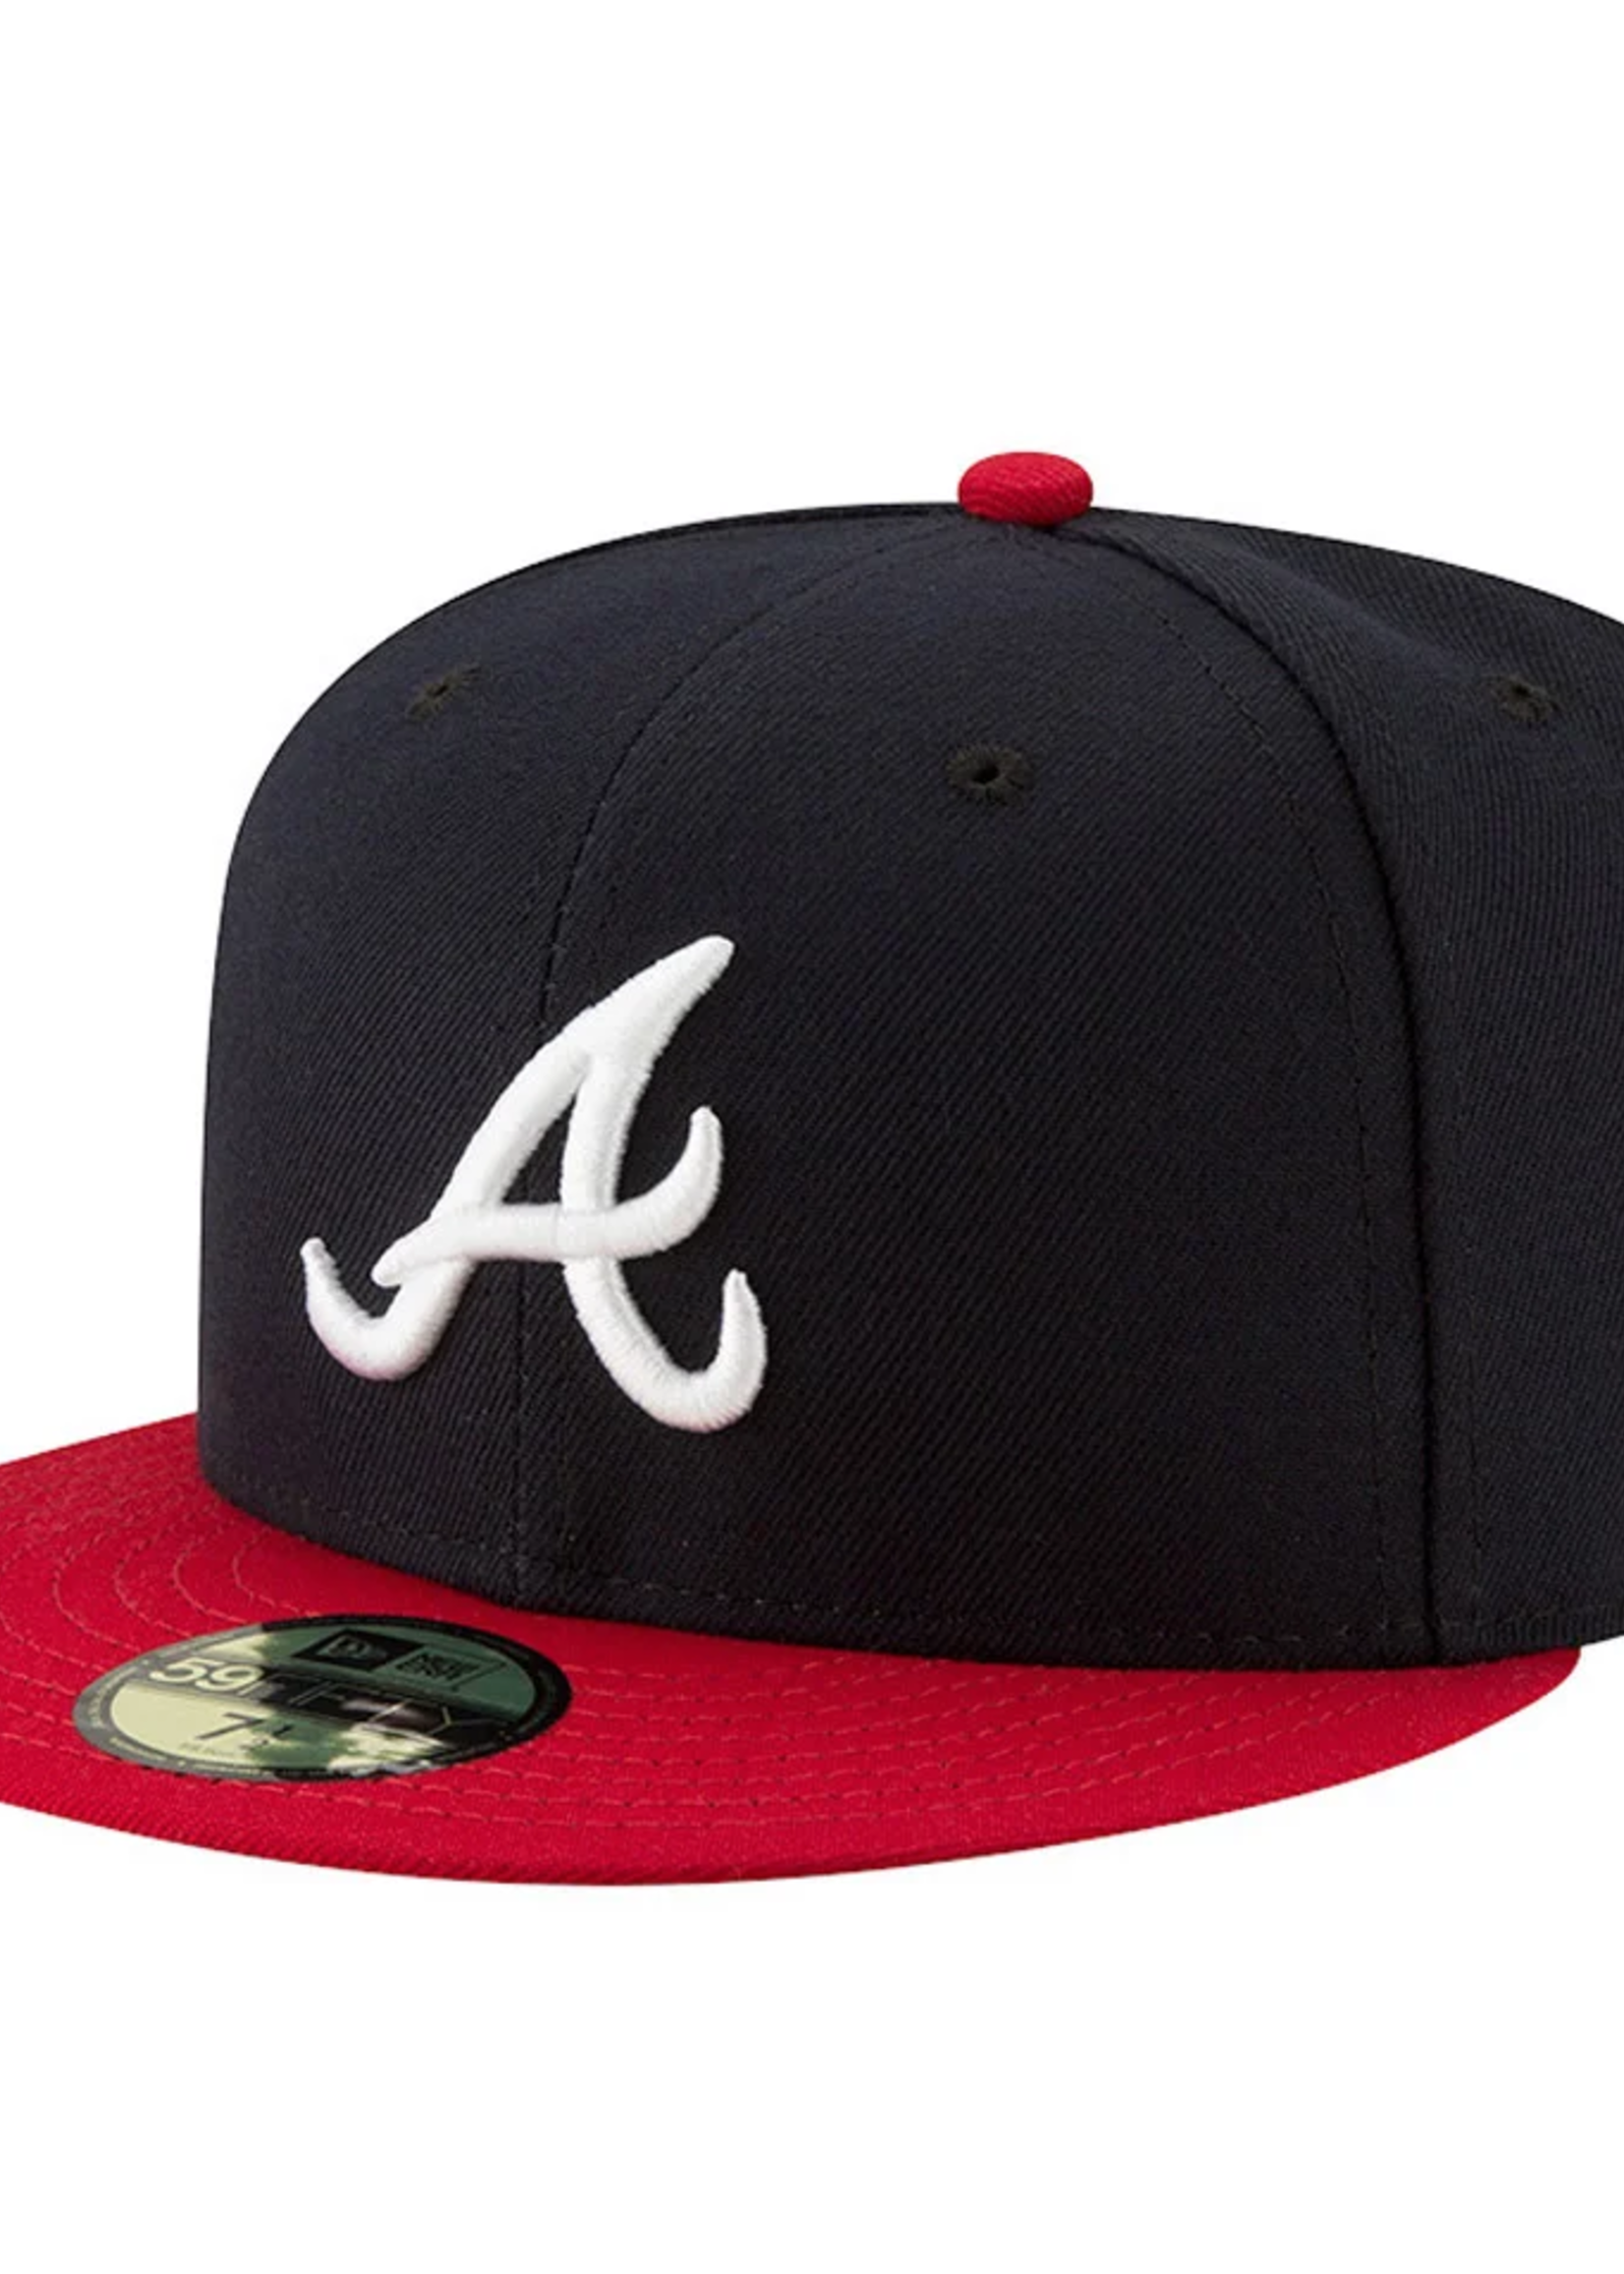 New Era Casquette Atlanta Braves 59Fifty Fitted Bleu Marine Rouge